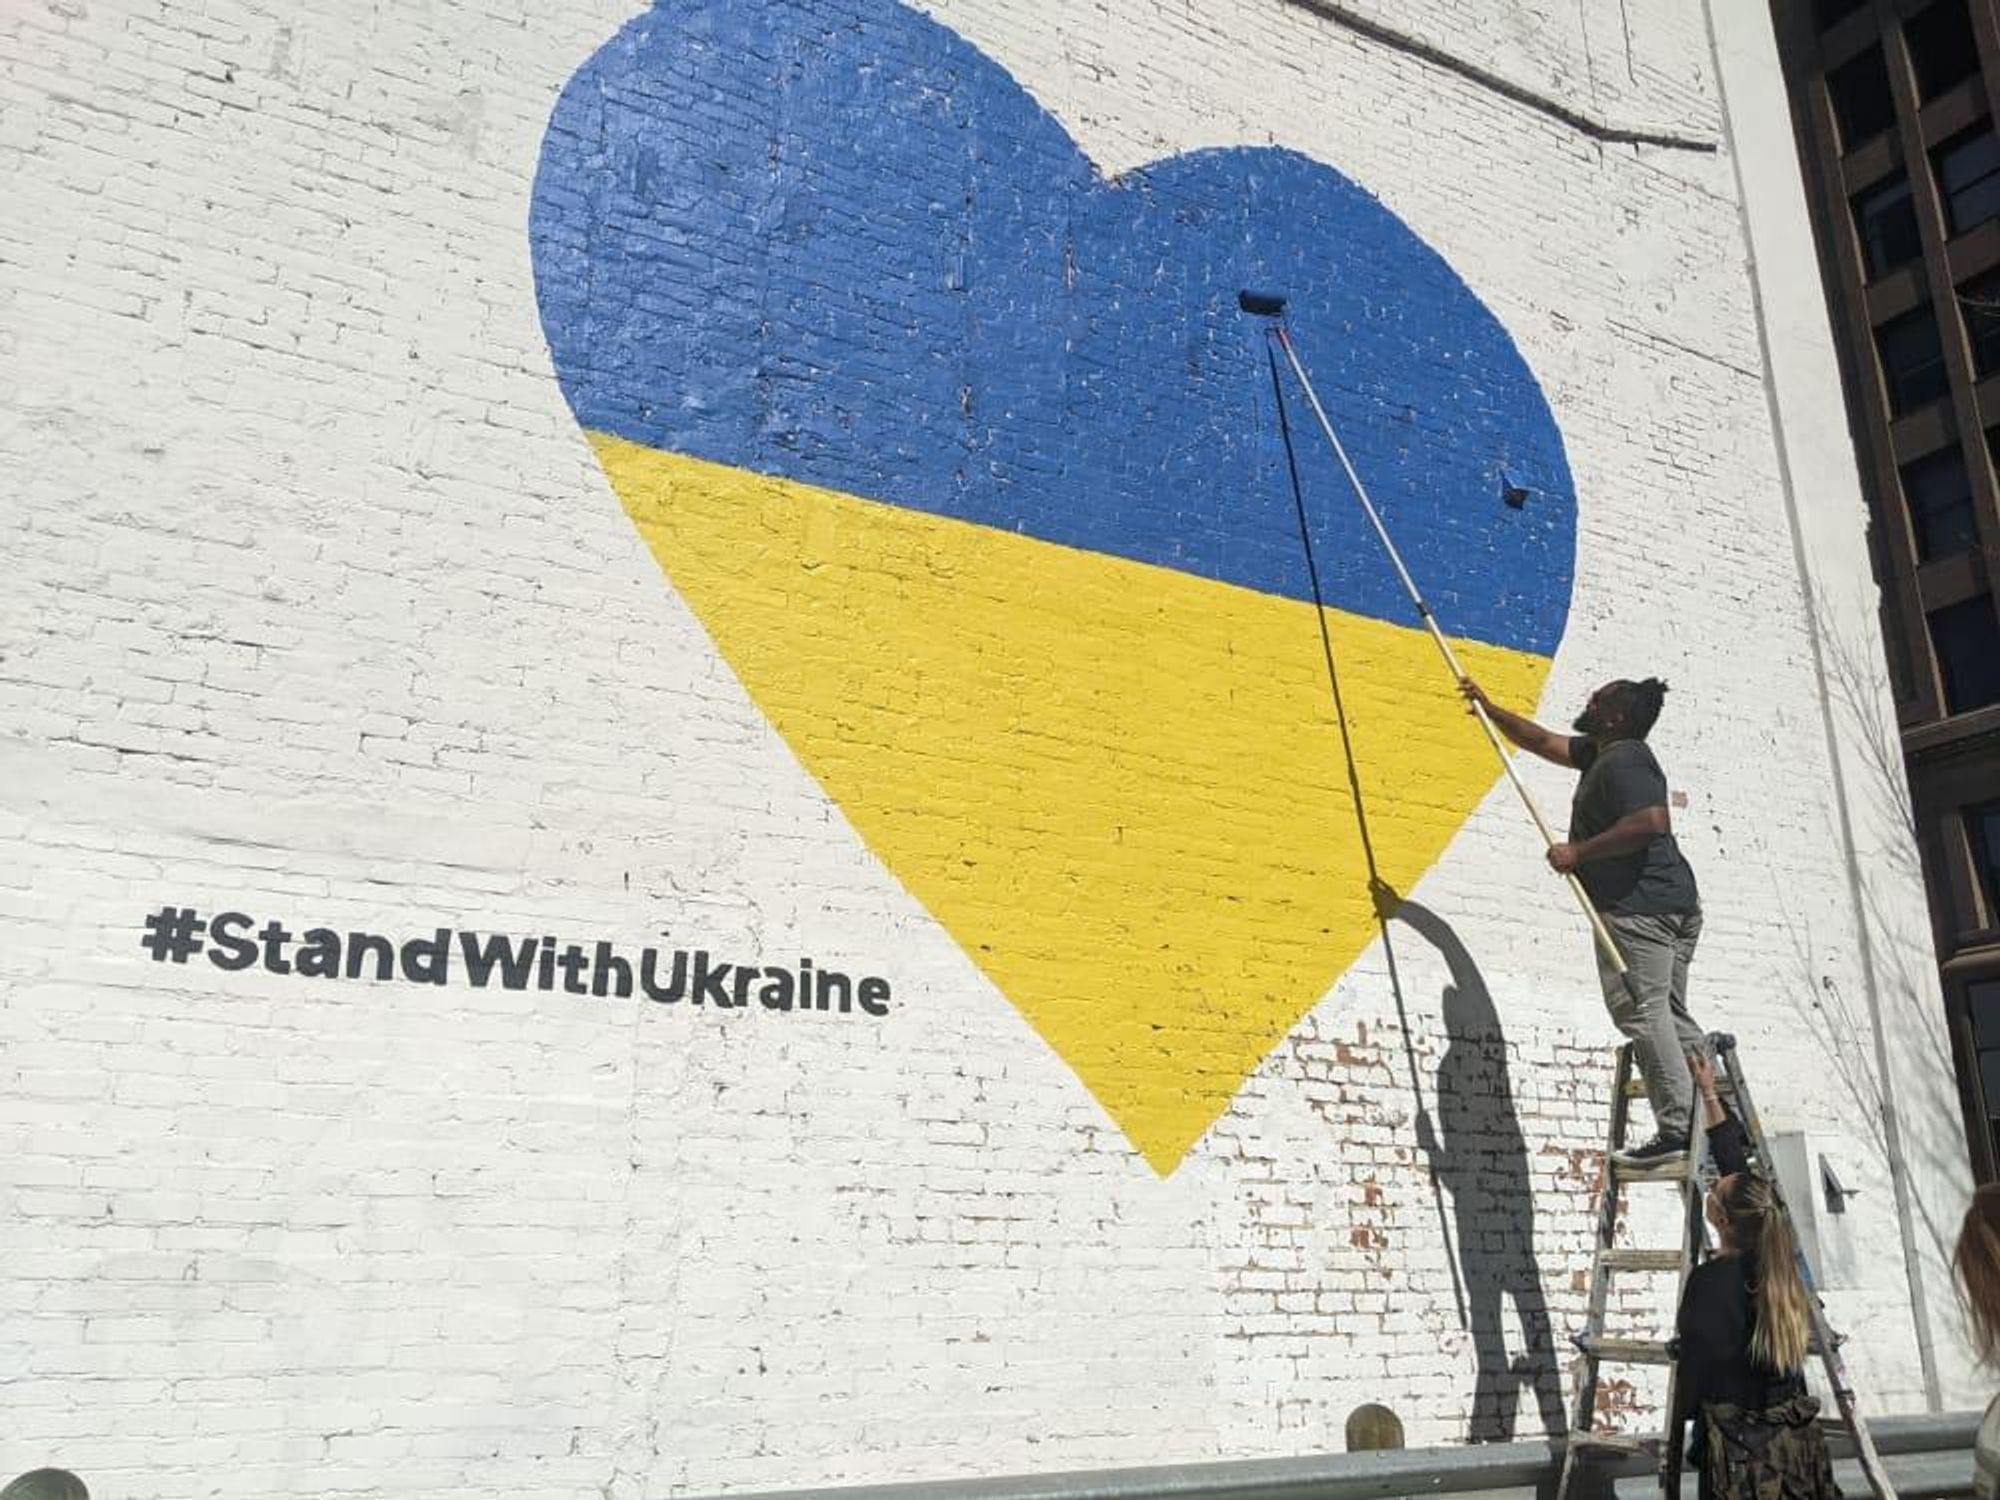 Stand with Ukraine mural Houston downtown